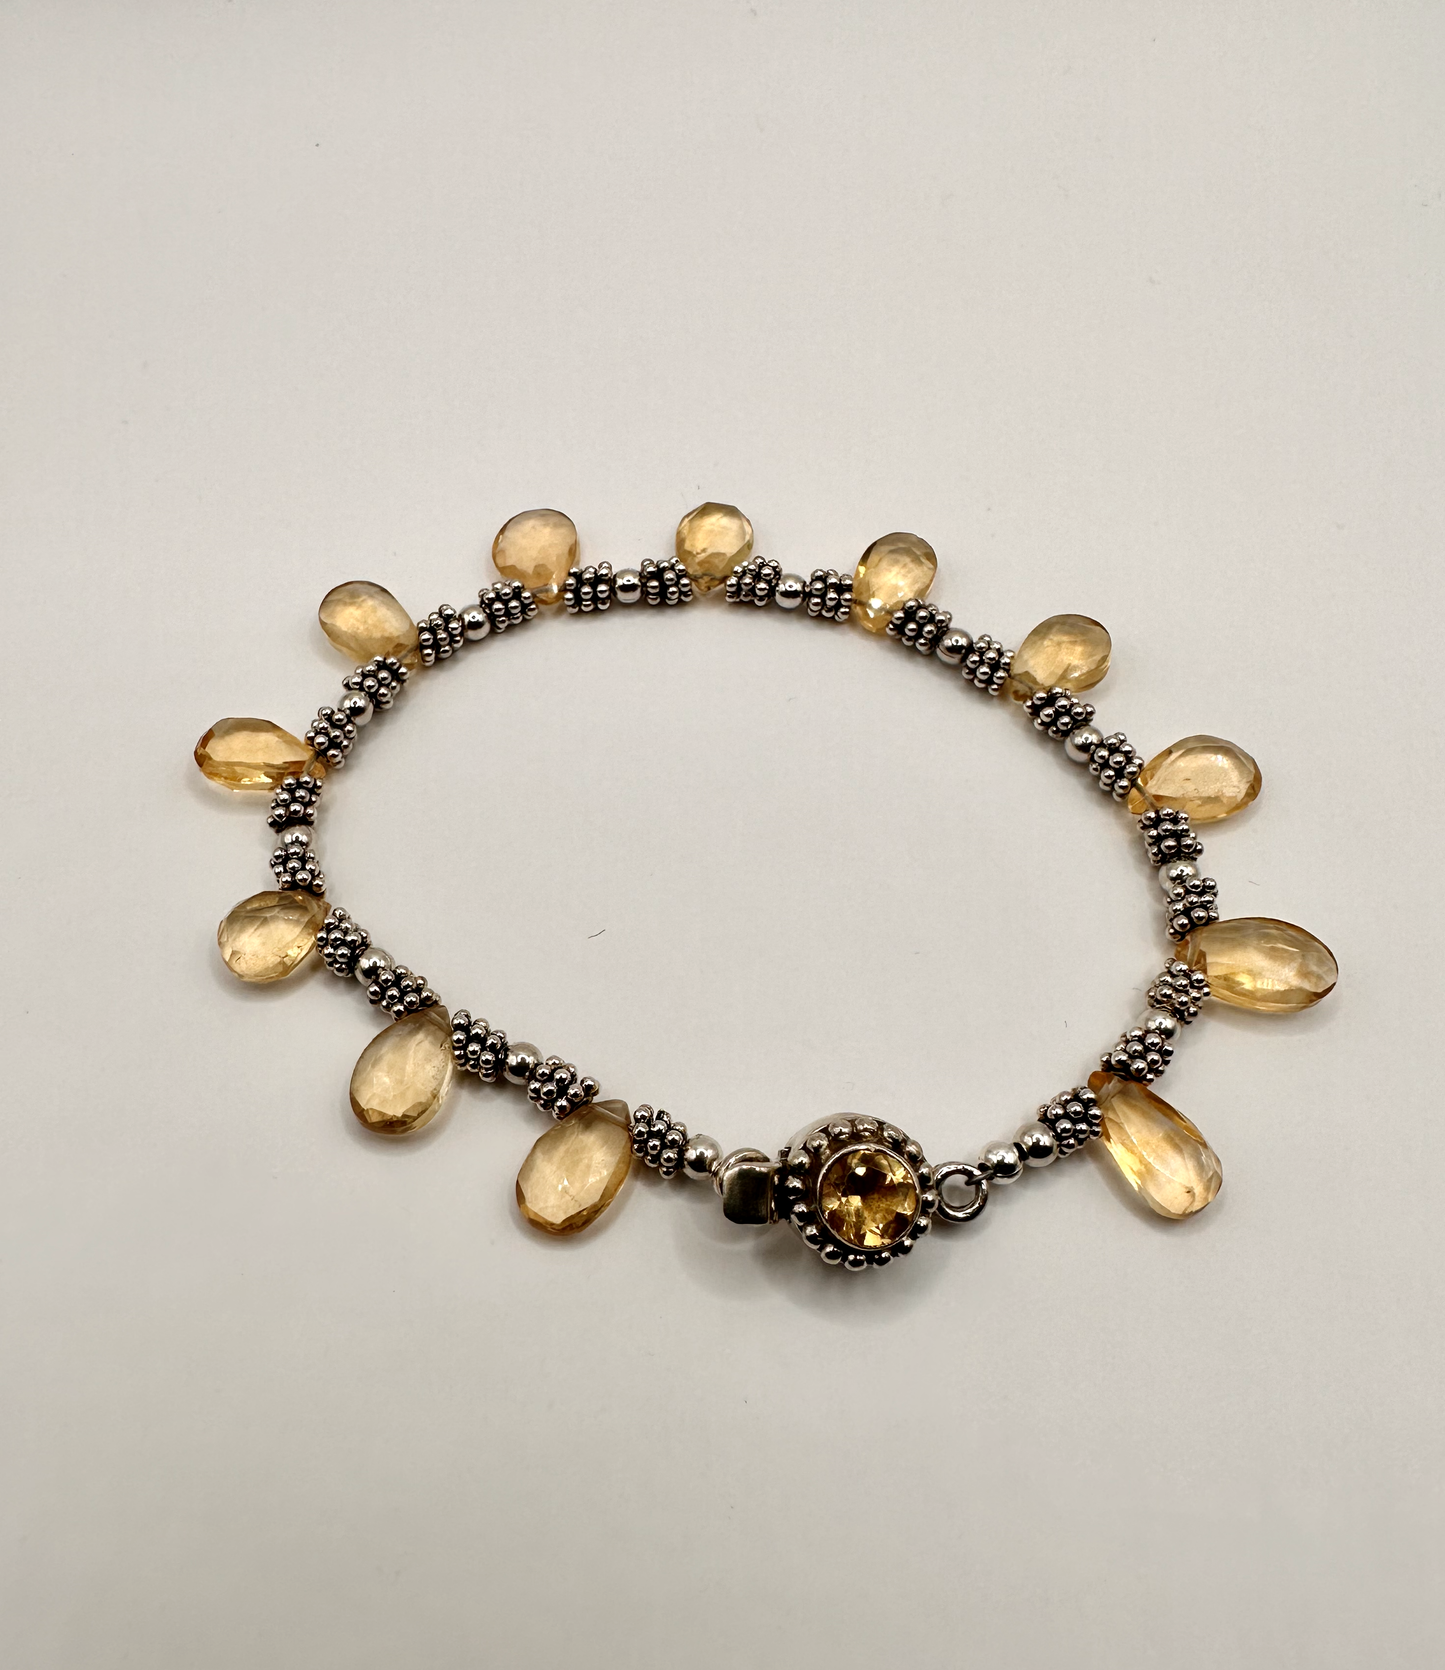 Citrine Briolettes with Sterling Silver Accent Beads and Fancy Clasp